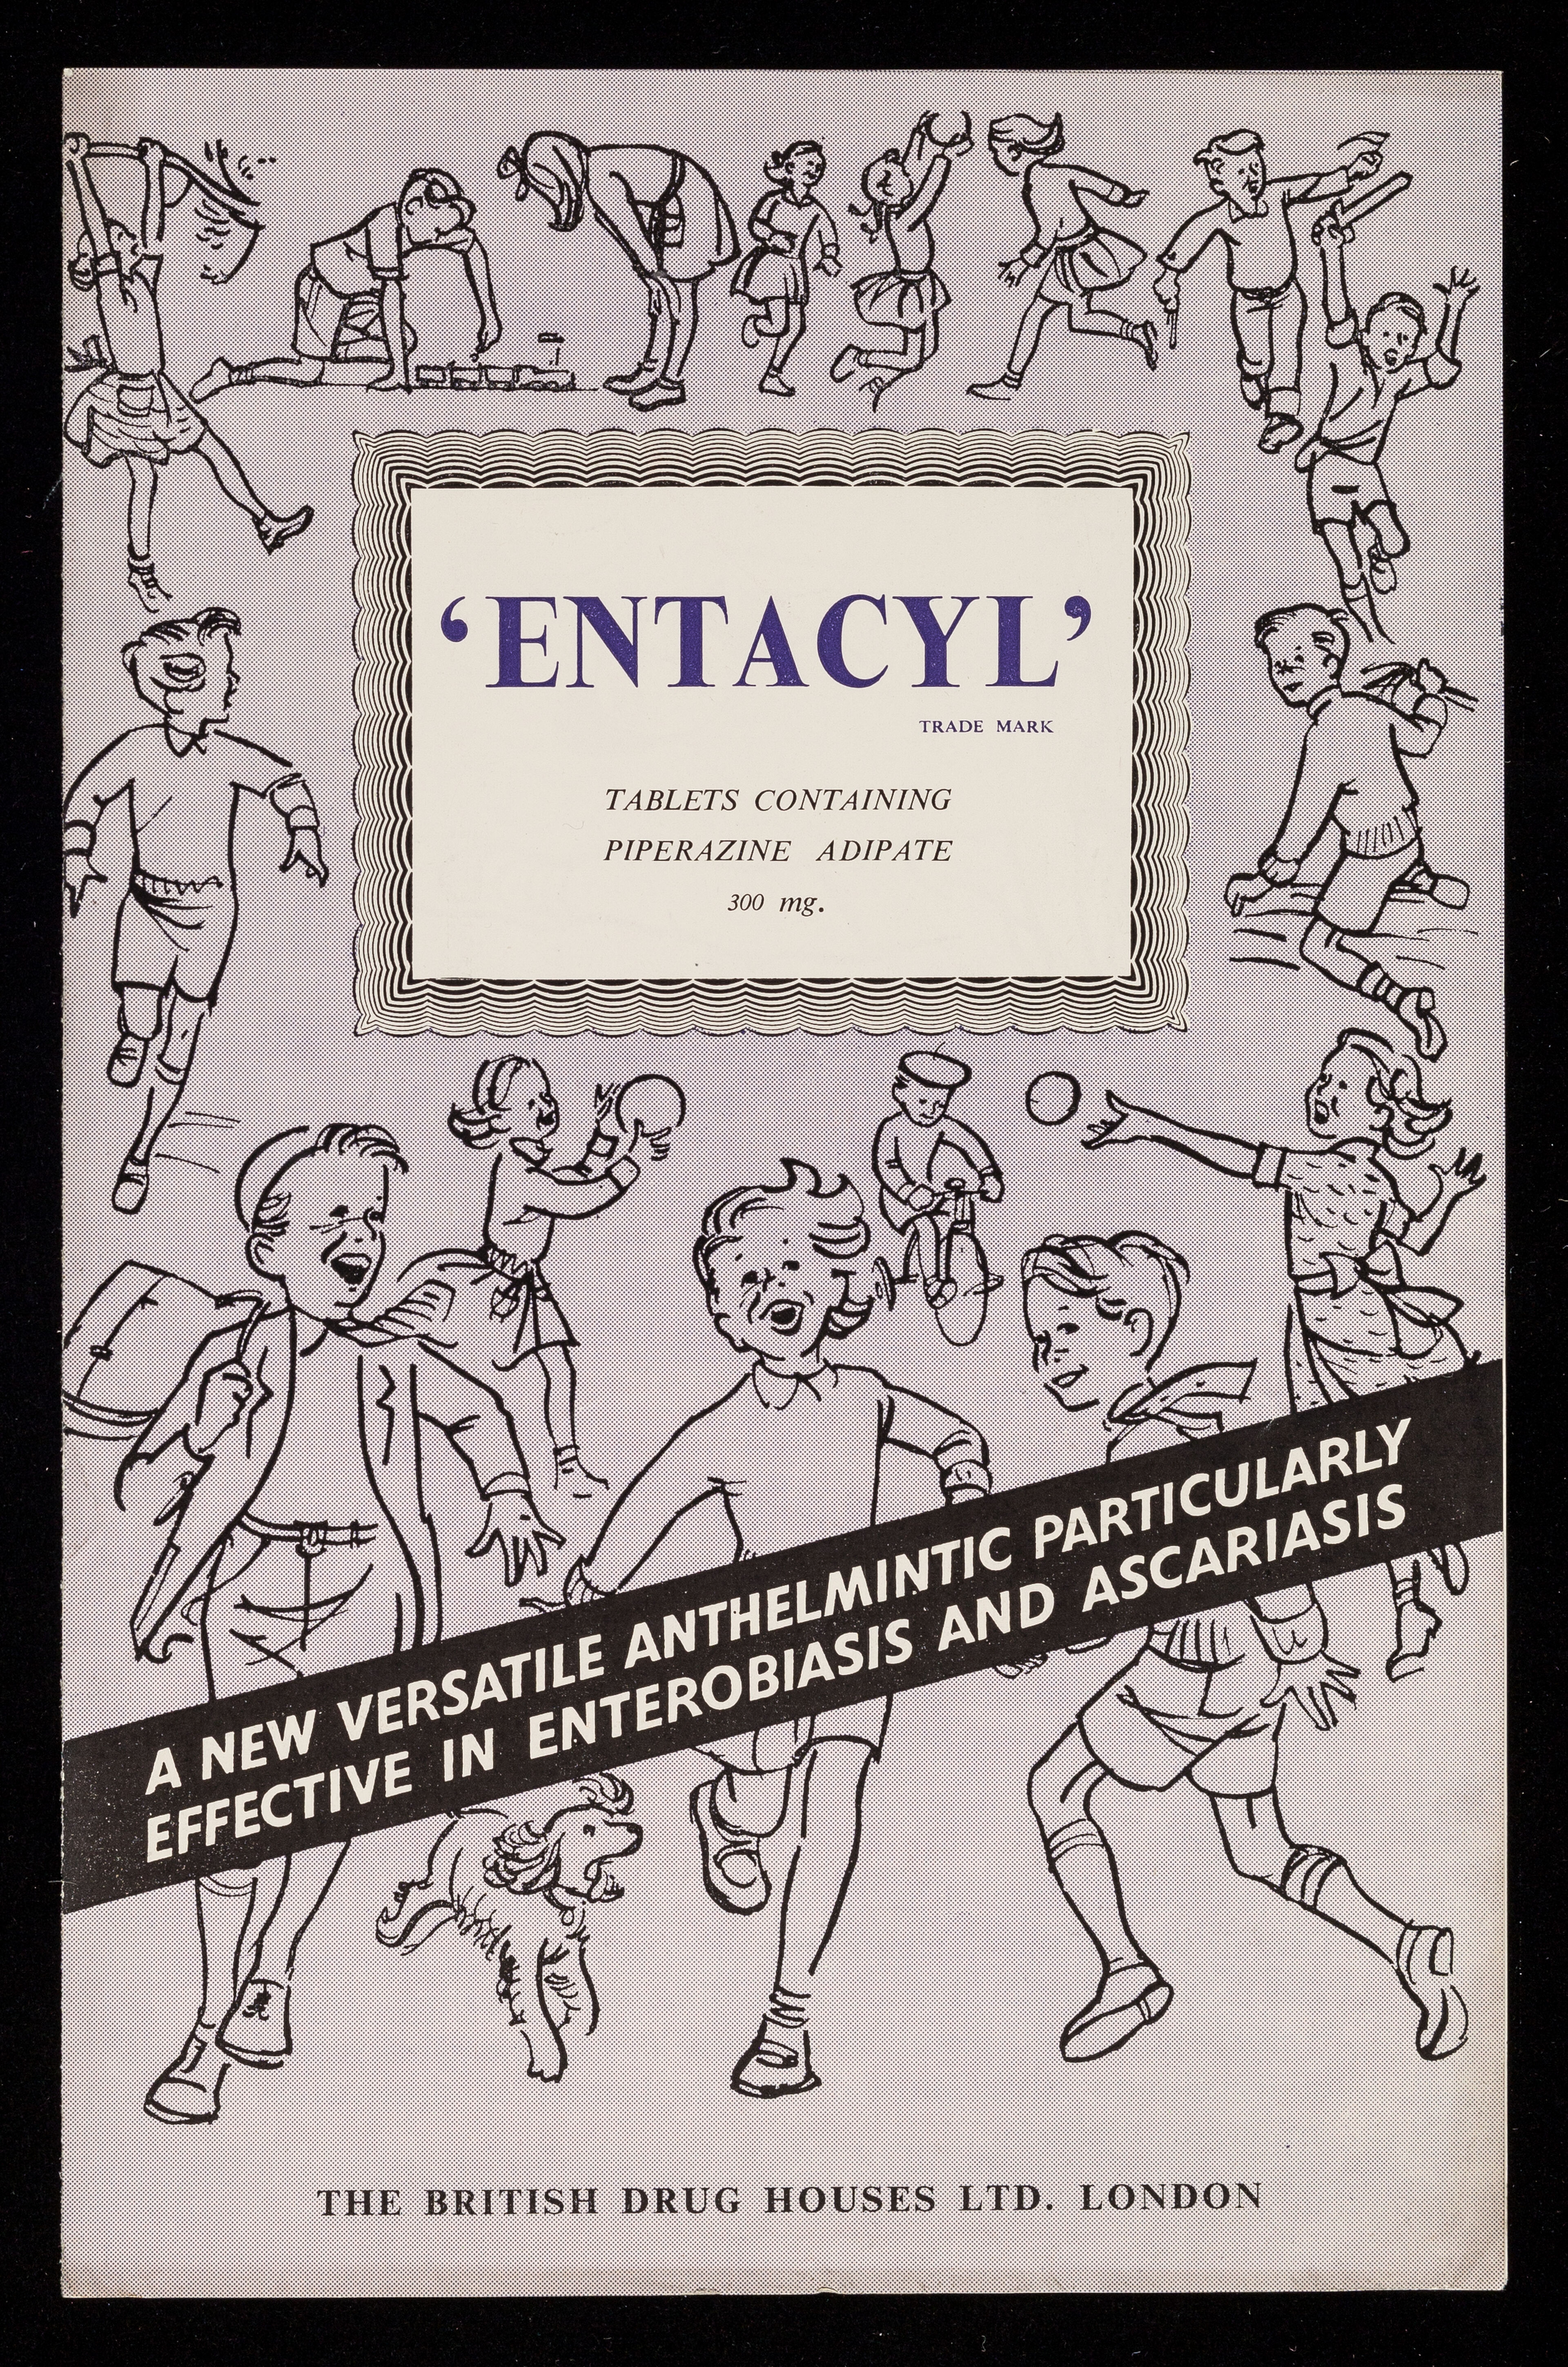 'Entacyl' : a new versatile anthelmintic particularly effective in enterobiasis and ascariasis.